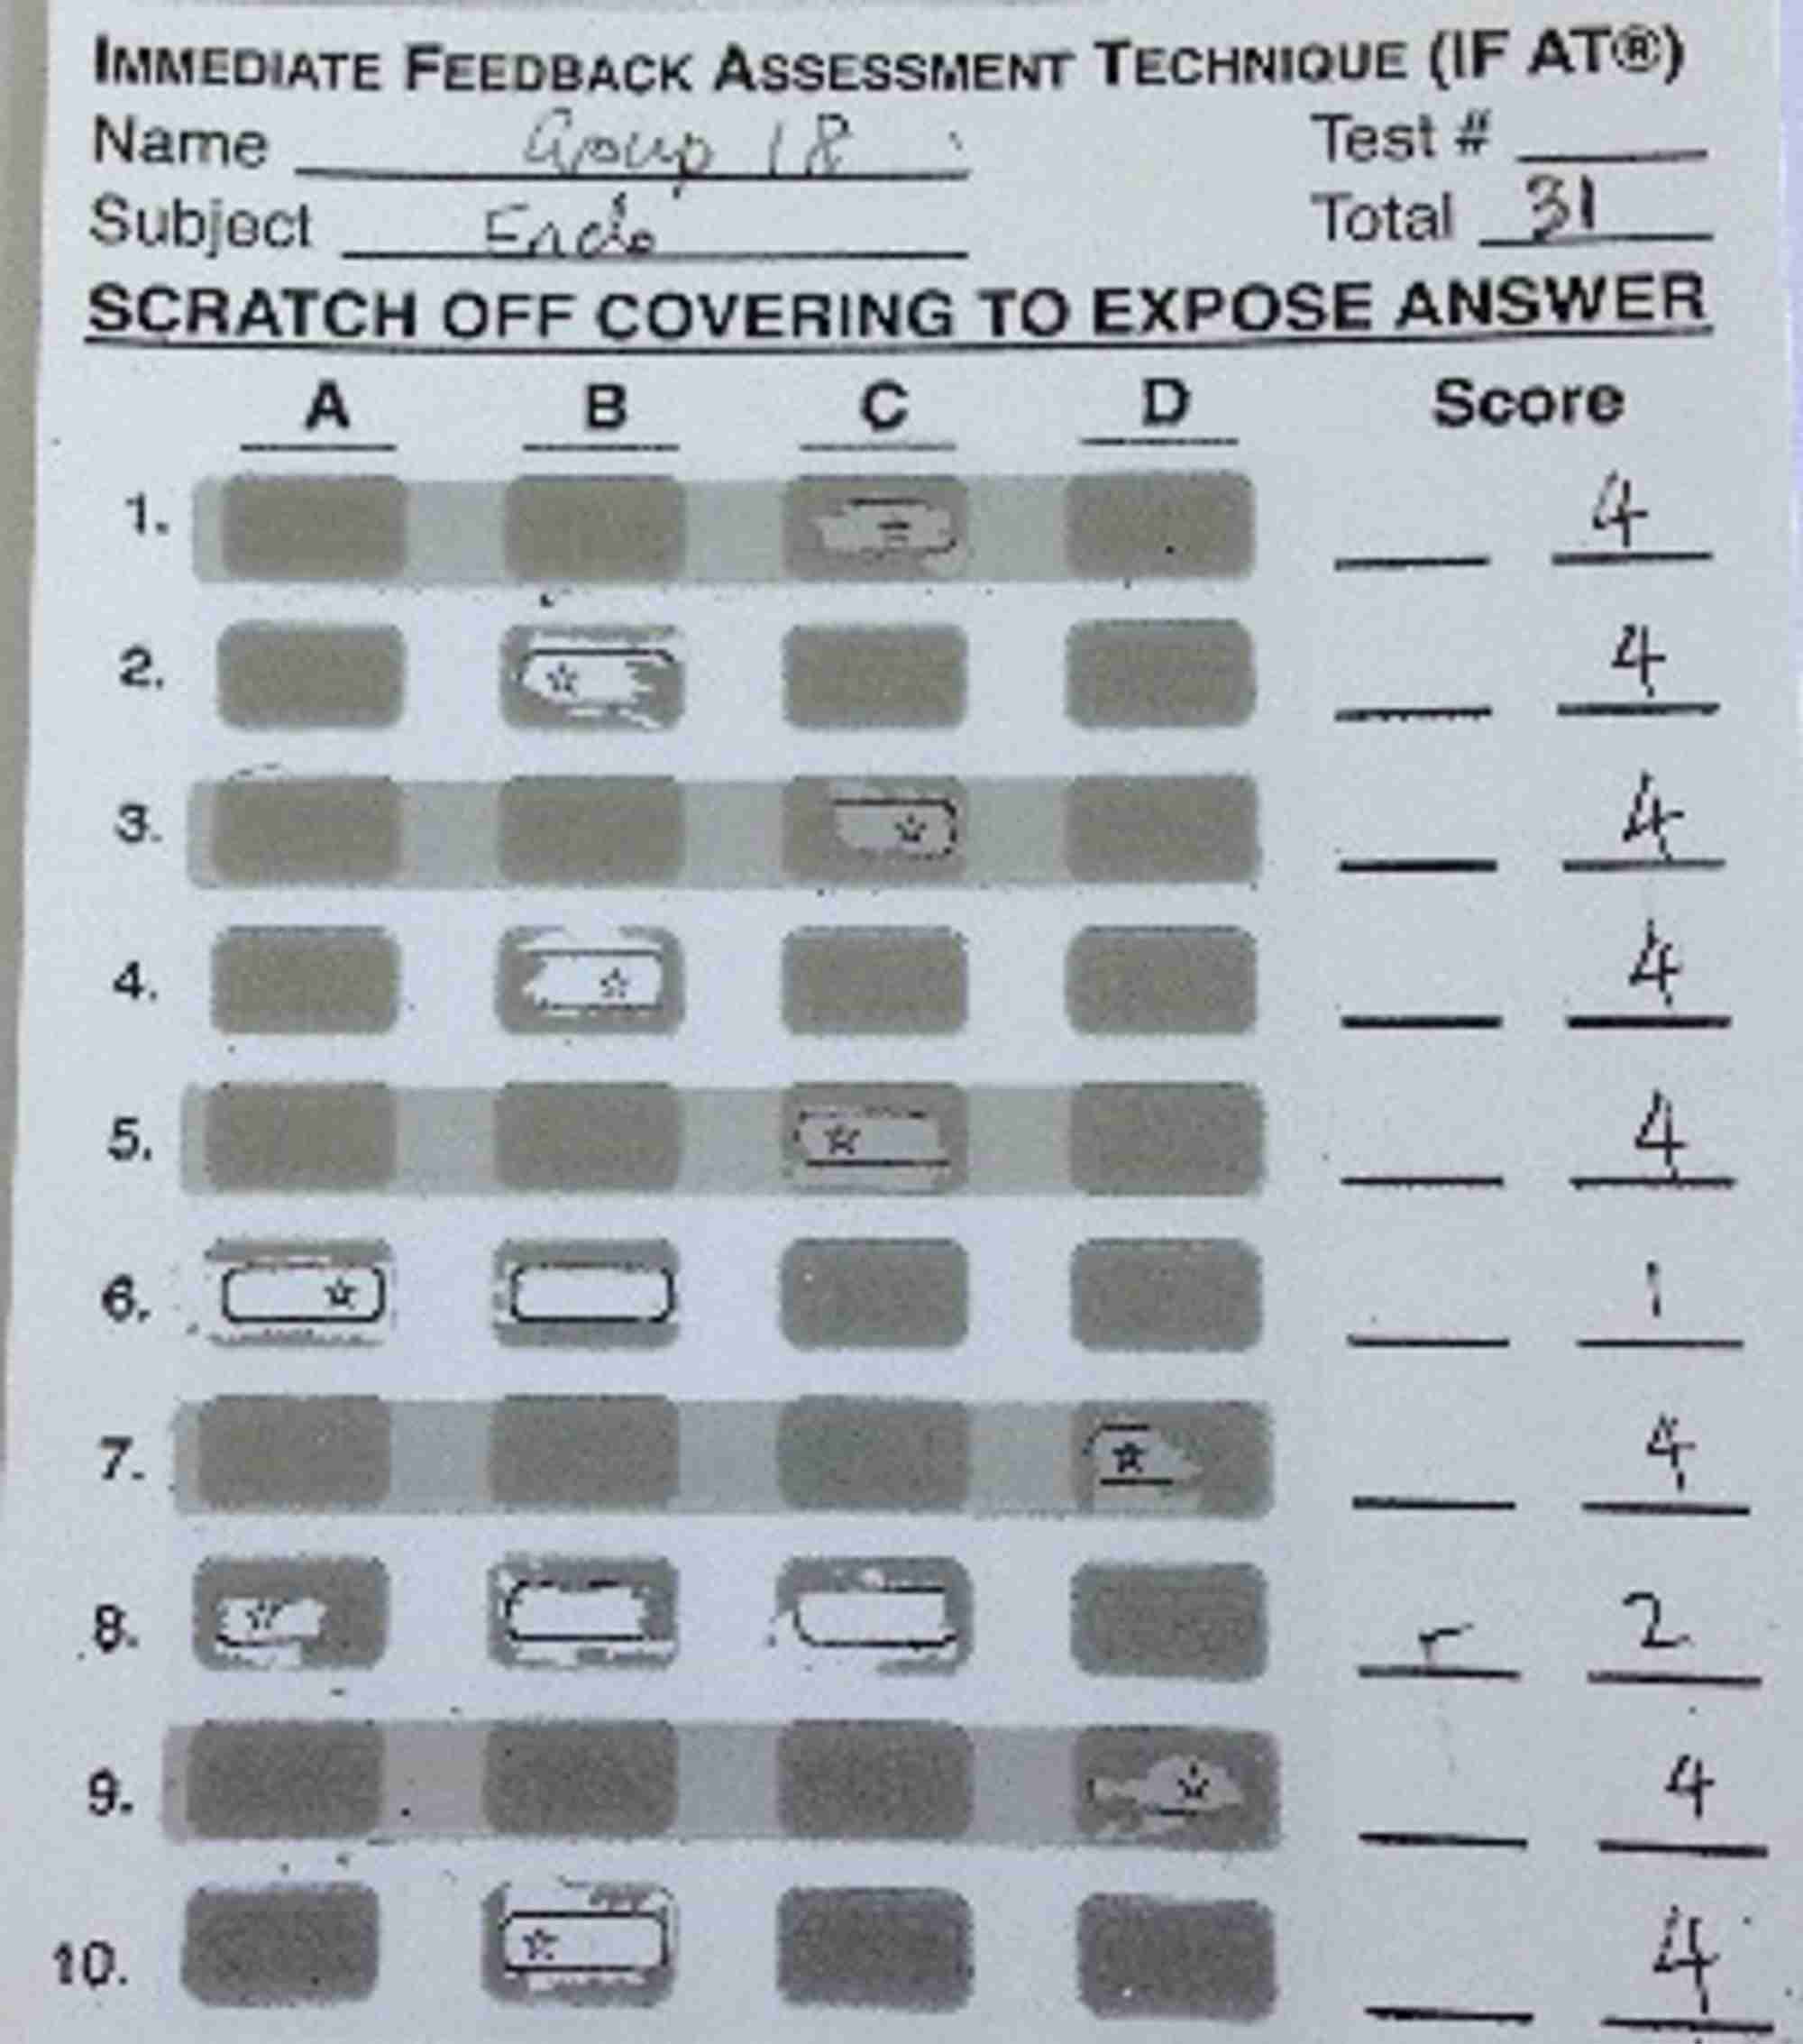 An example of the scratchcards used for the iRAT test